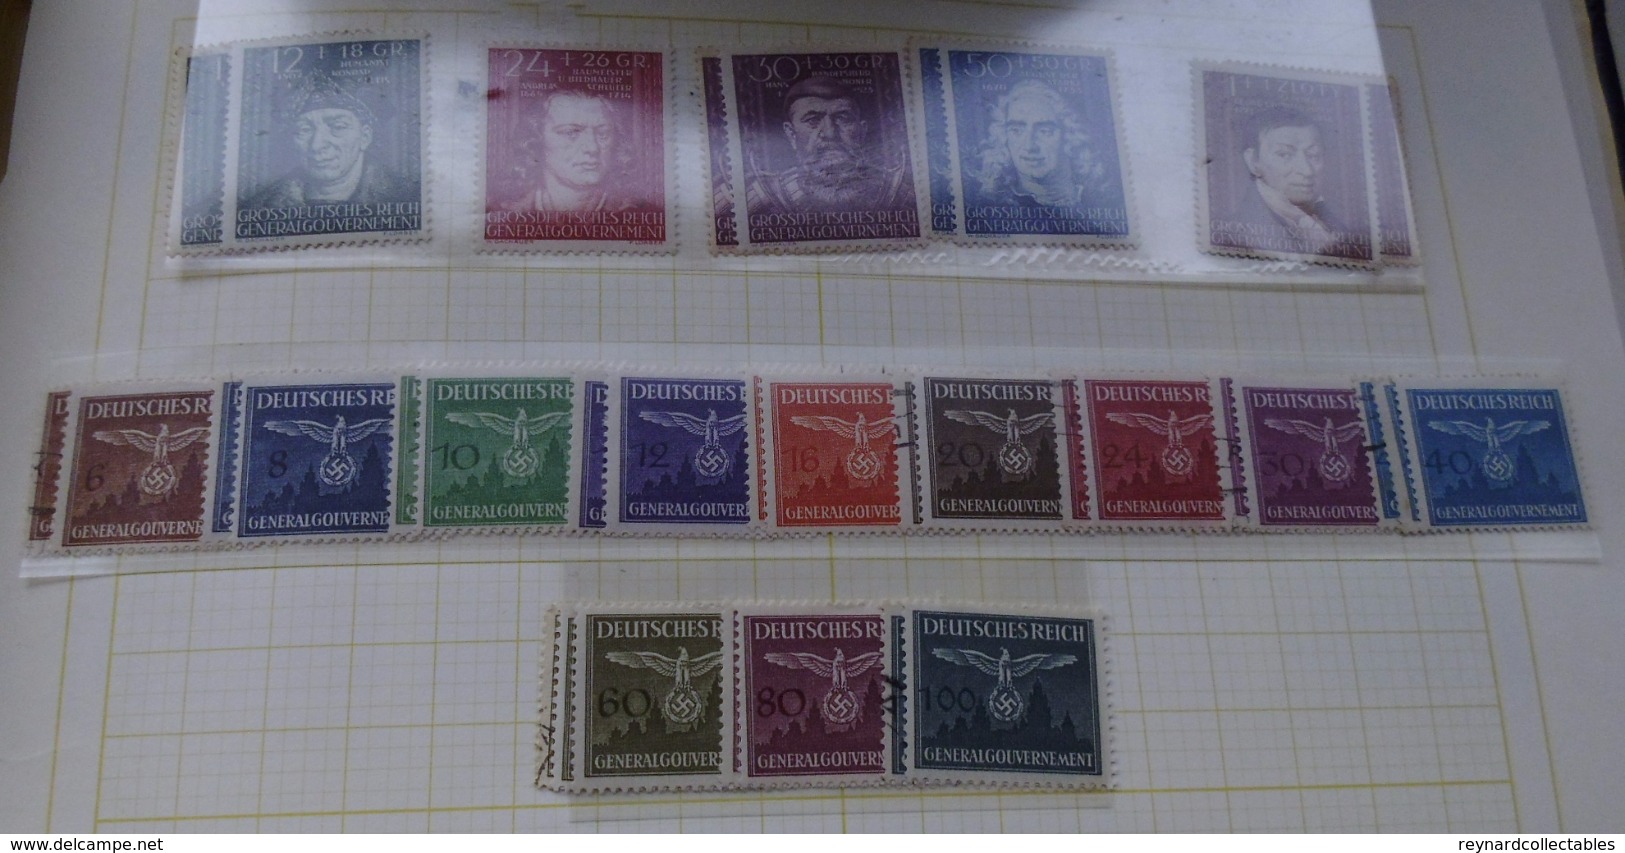 Superb Poland colln in Schaubek 1915-1950s,+ hagners,covers. 1930s m/sheets, mint/used. Danzig etc